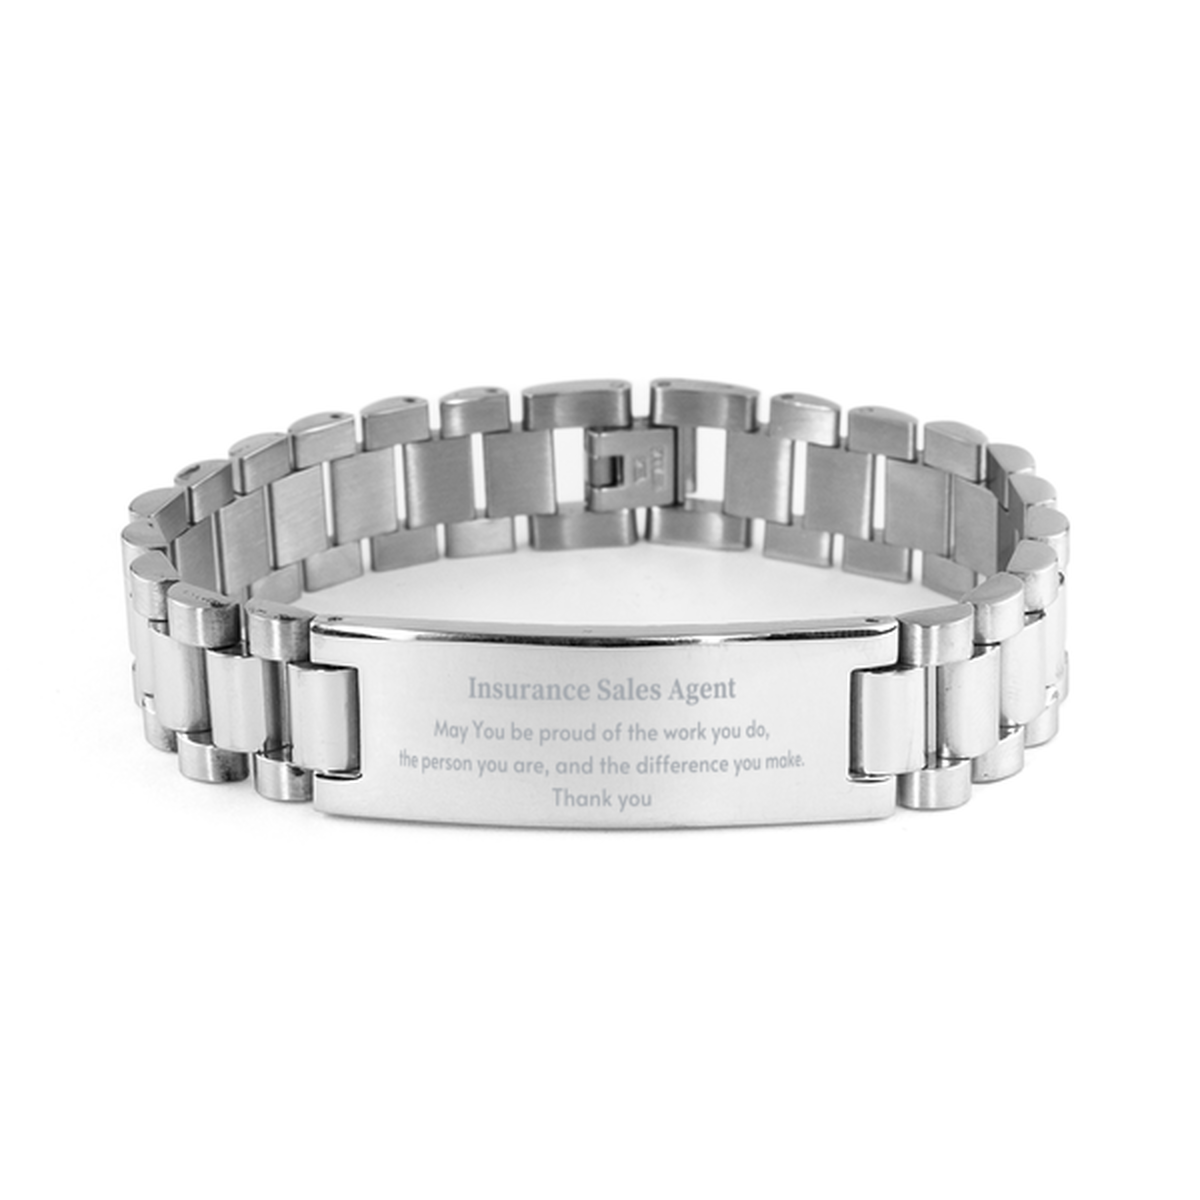 Heartwarming Ladder Stainless Steel Bracelet Retirement Coworkers Gifts for Insurance Sales Agent, Insurance Sales Agent May You be proud of the work you do, the person you are Gifts for Boss Men Women Friends